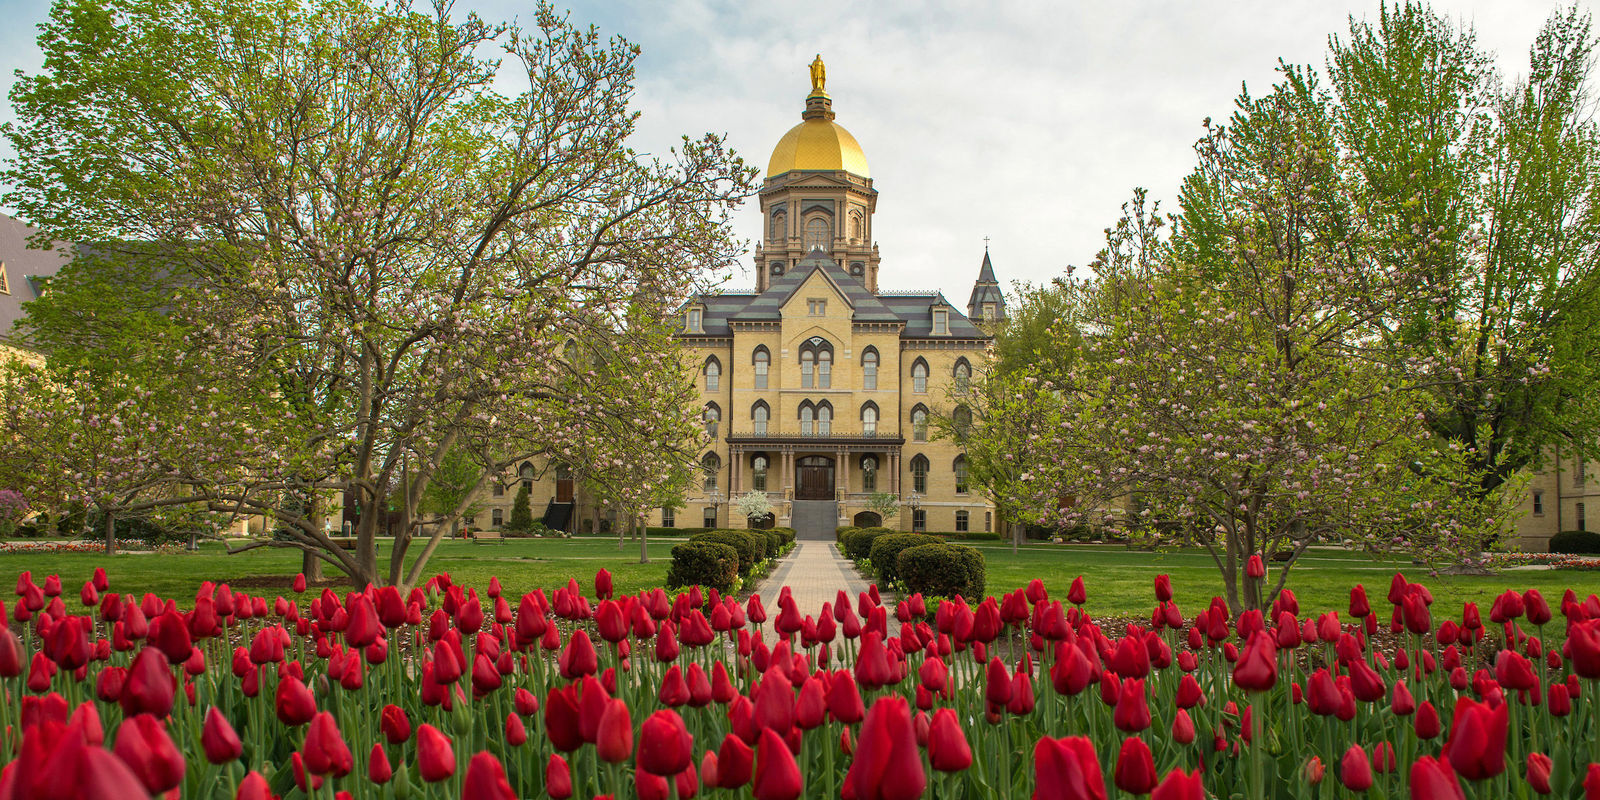 self guided tour of notre dame university